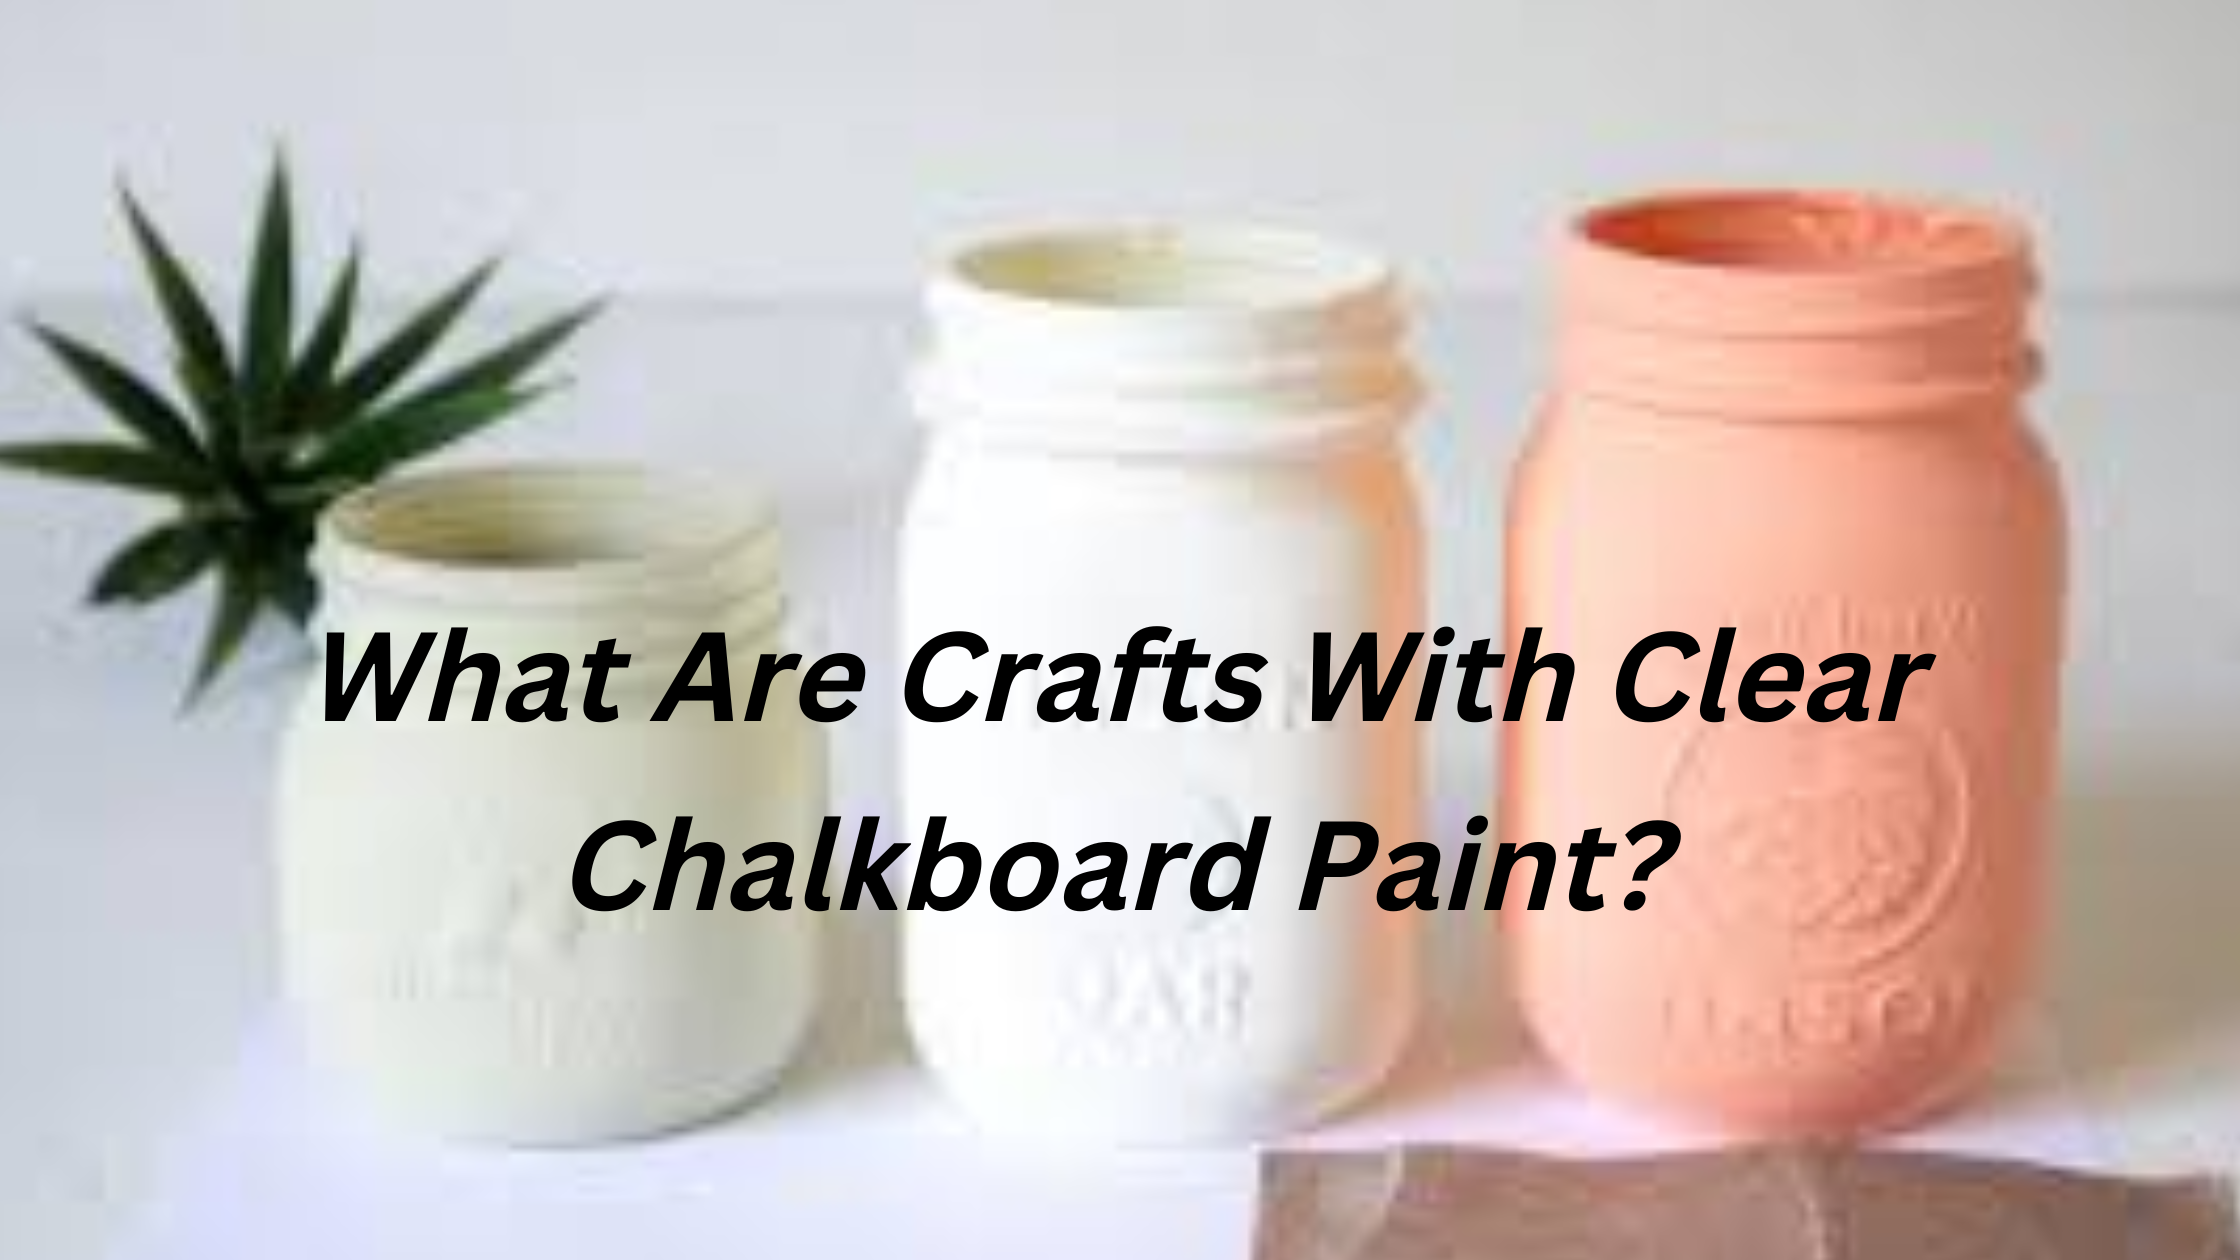 What Are Crafts With Clear Chalkboard Paint?